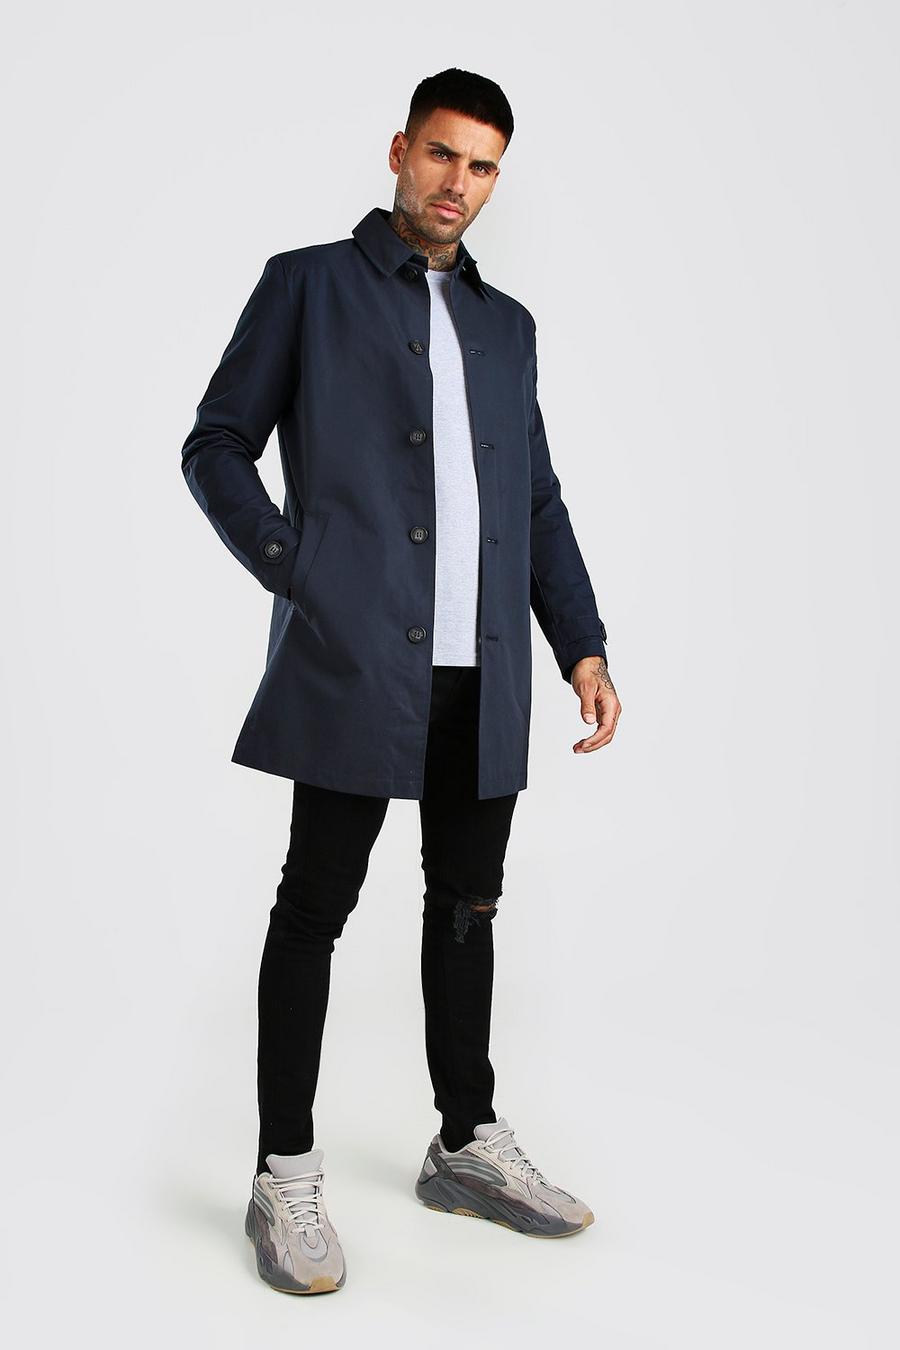 Impermeabile Smart a monopetto stile Trench, Navy azul marino image number 1